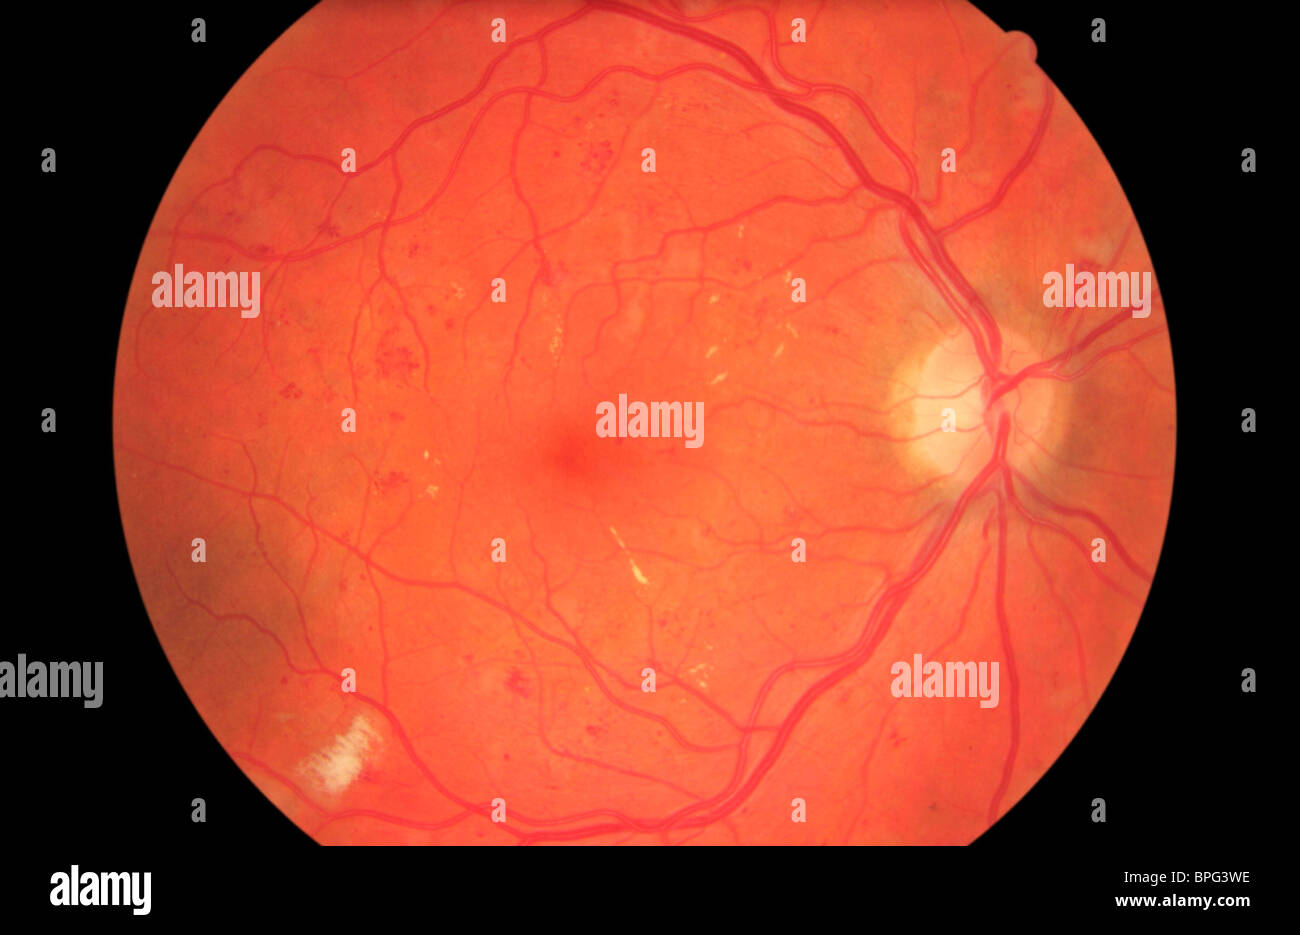 Preproliferative diabetic retinopathy is a more advanced stage of damage to the eye than the early signs found in BDR. Stock Photo